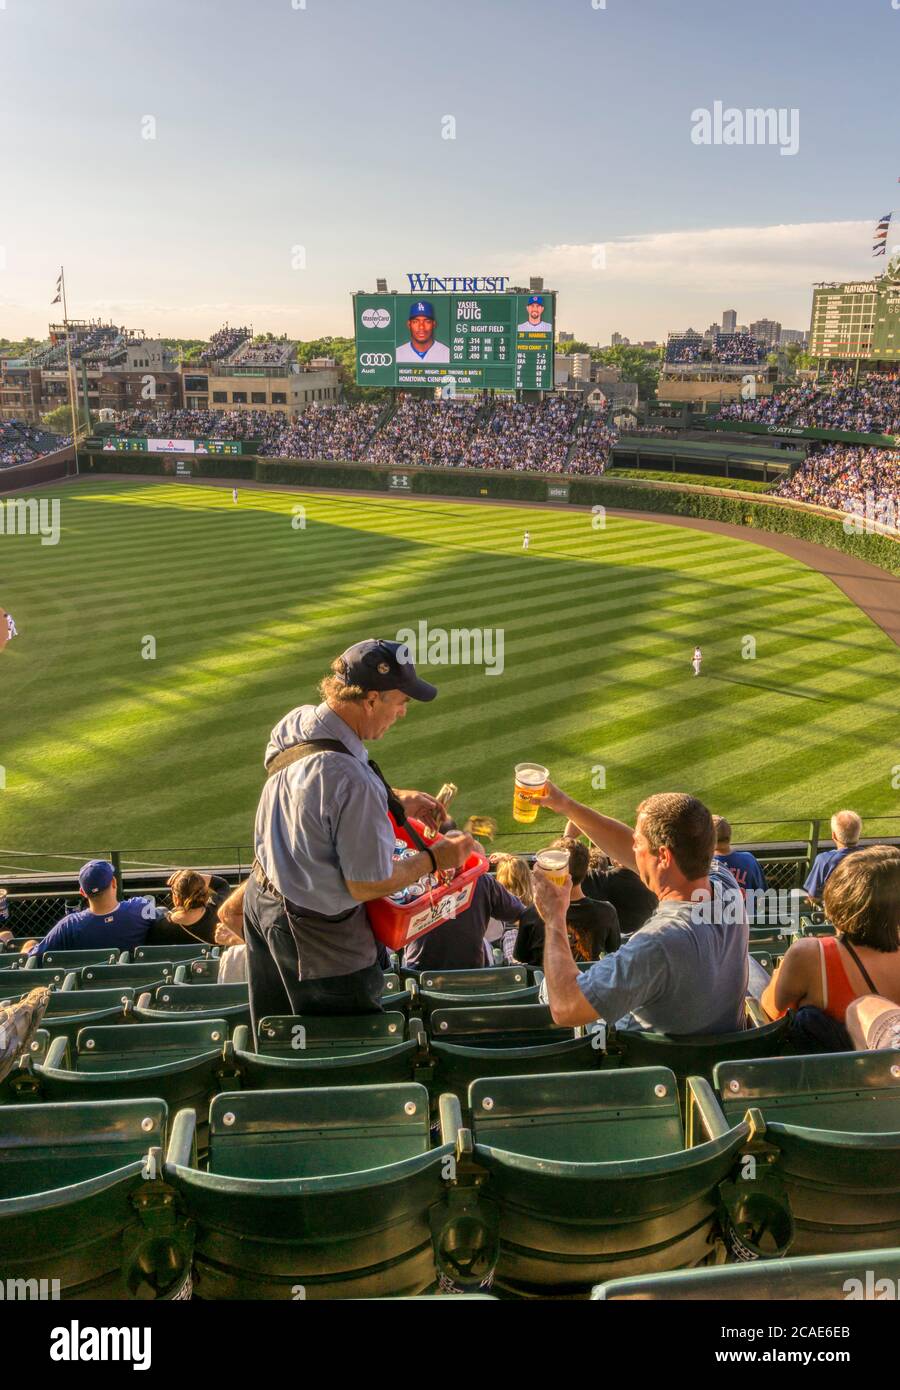 Steward selling cold beers at an American baseball game at Wrigley Field, Chicago.  Chicago Cubs v LA Dodgers. Stock Photo